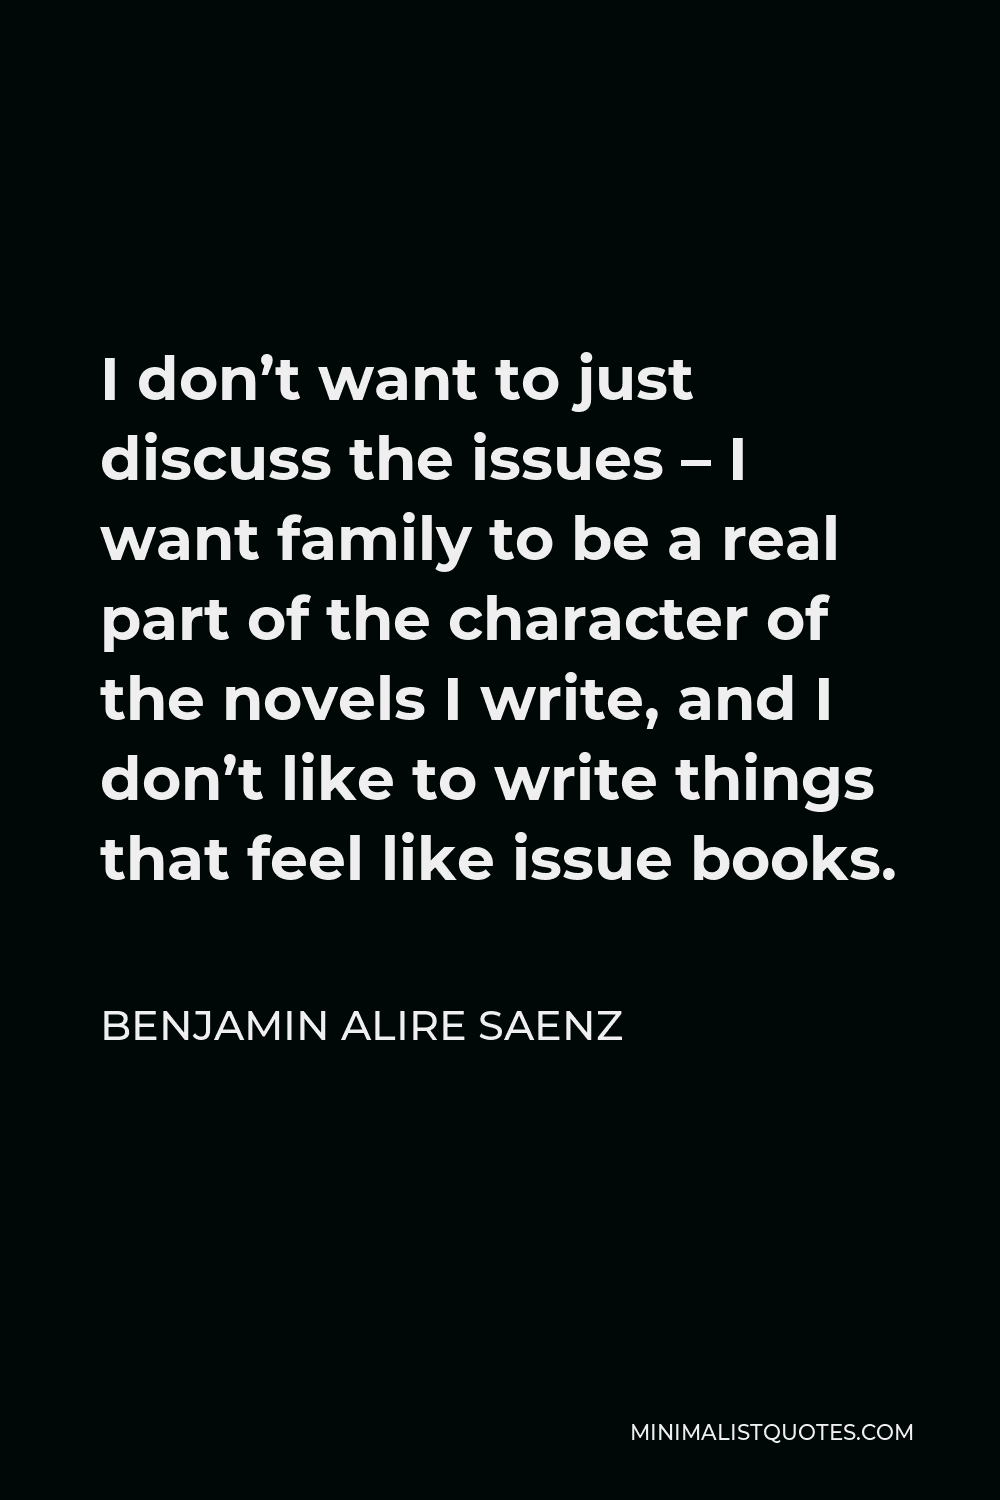 Benjamin Alire Saenz Quote - I don’t want to just discuss the issues – I want family to be a real part of the character of the novels I write, and I don’t like to write things that feel like issue books.